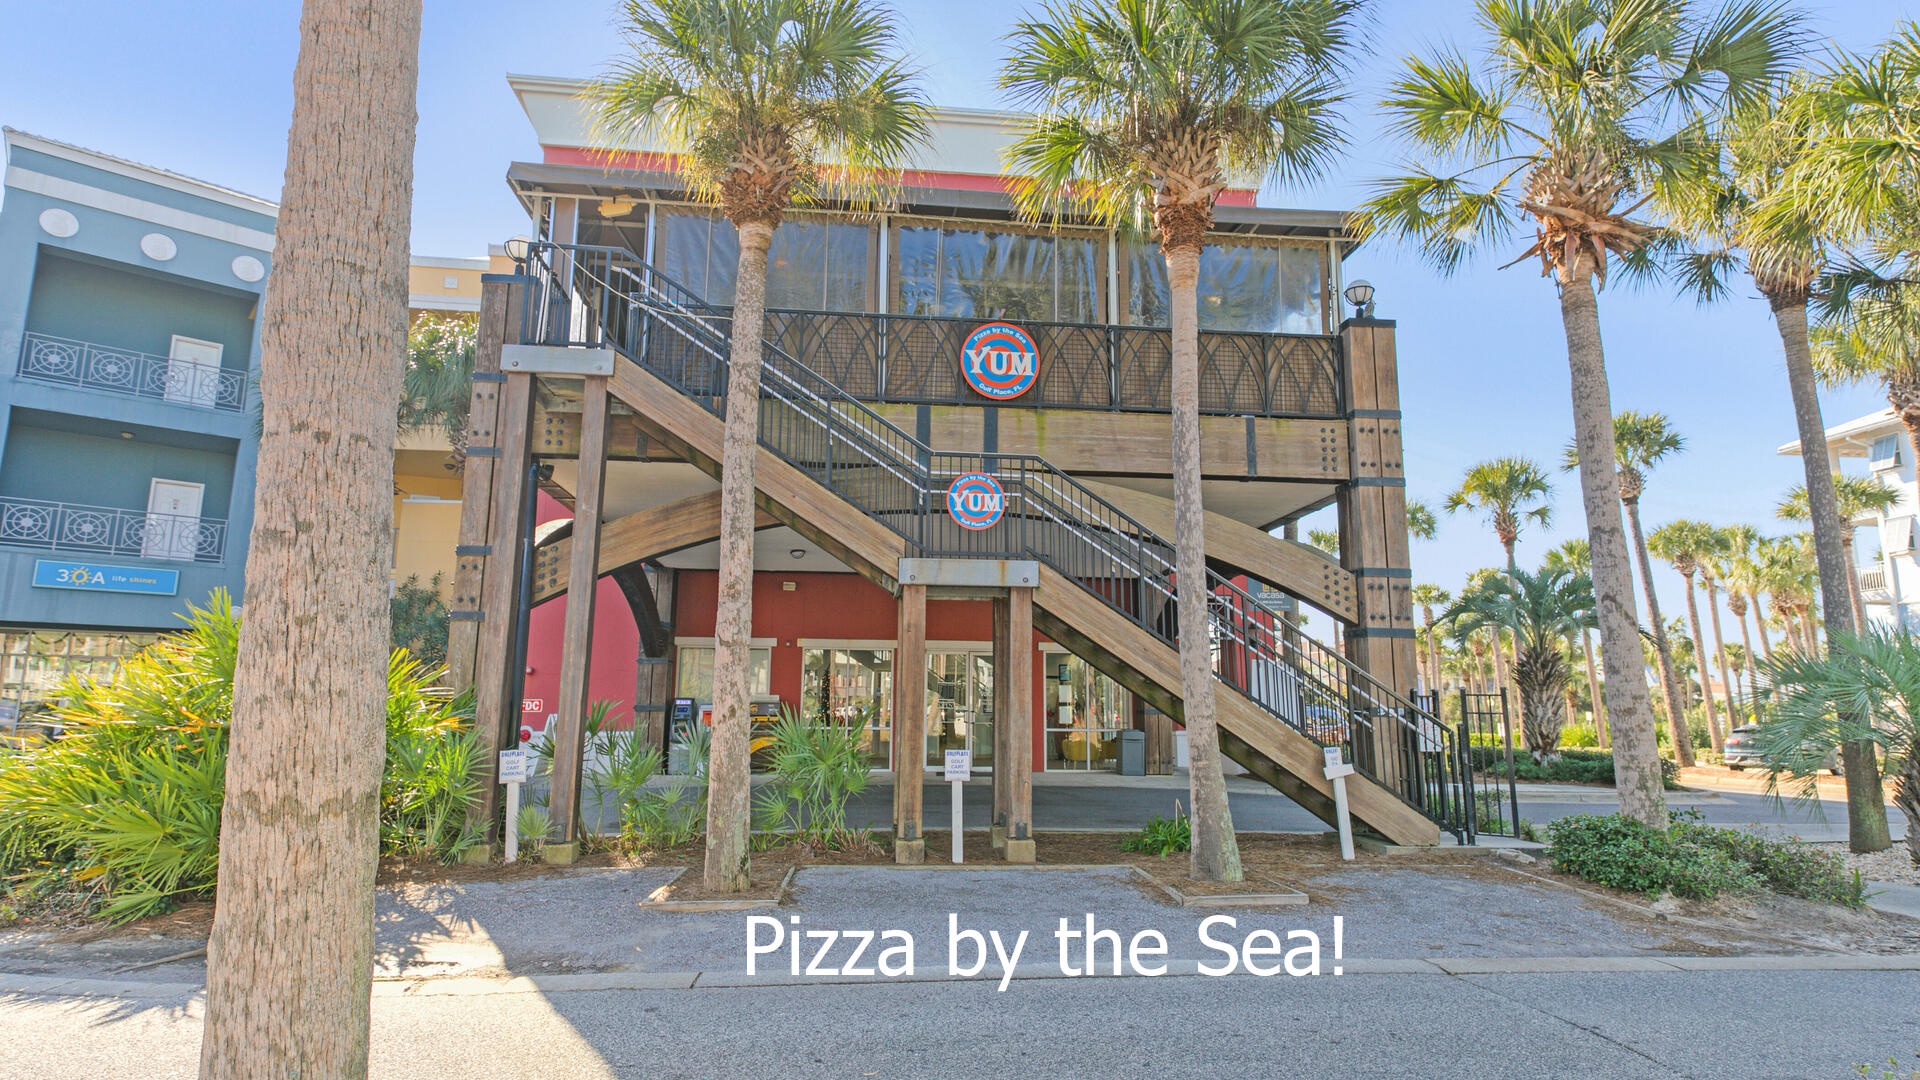 Shopping, dining, and activities at nearby Gulf Place!55